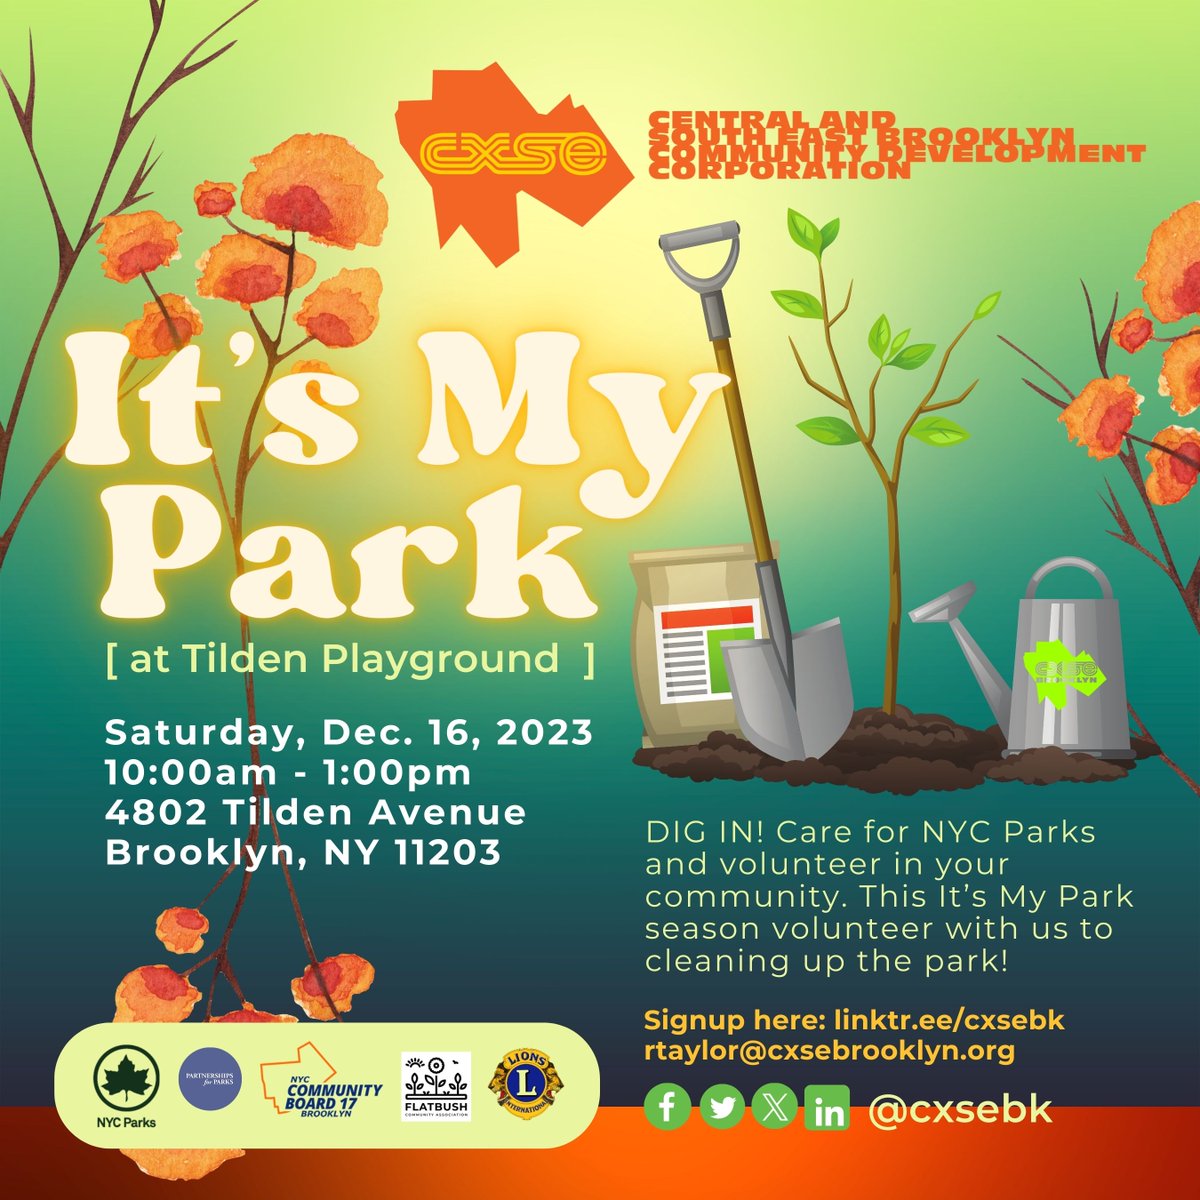 See you soon! This #ItsMyPark season, volunteer with us to clean up the park! Meet us at Tilden Playground 4802 Tilden Ave, Brooklyn, NY 11203 10:00 AM - 1:00 PM